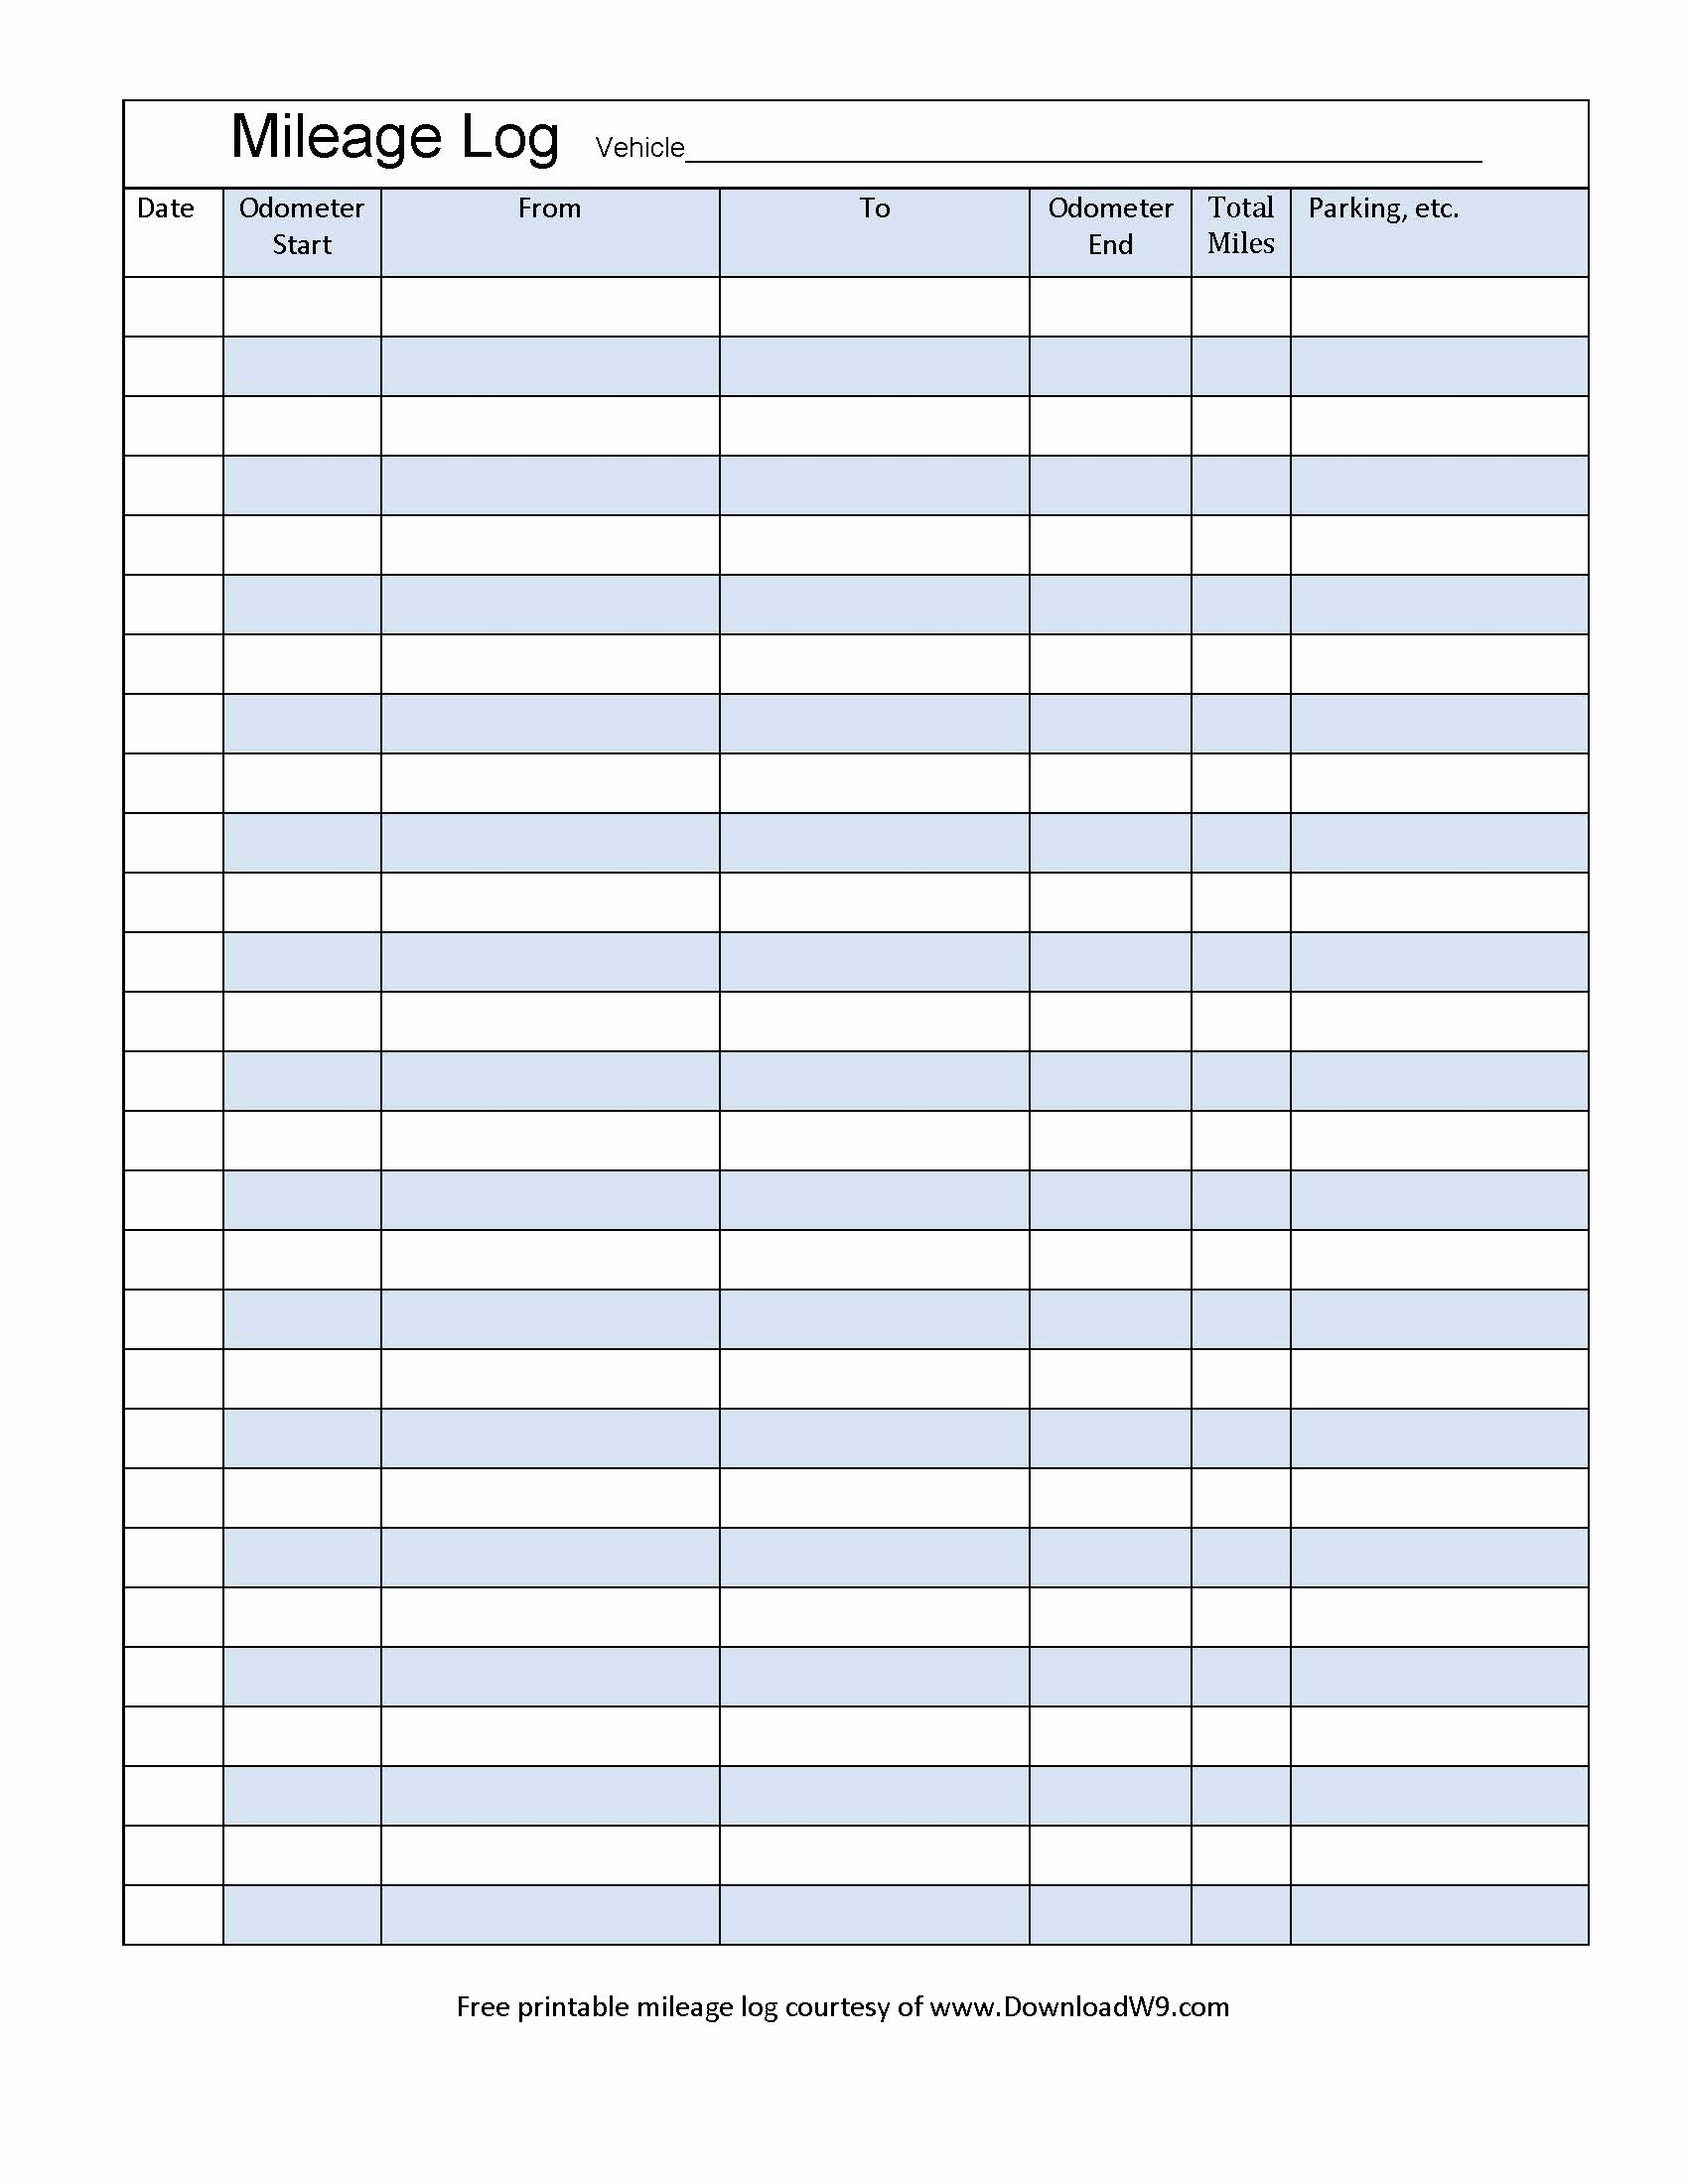 can i print an excel spreadsheet to word document